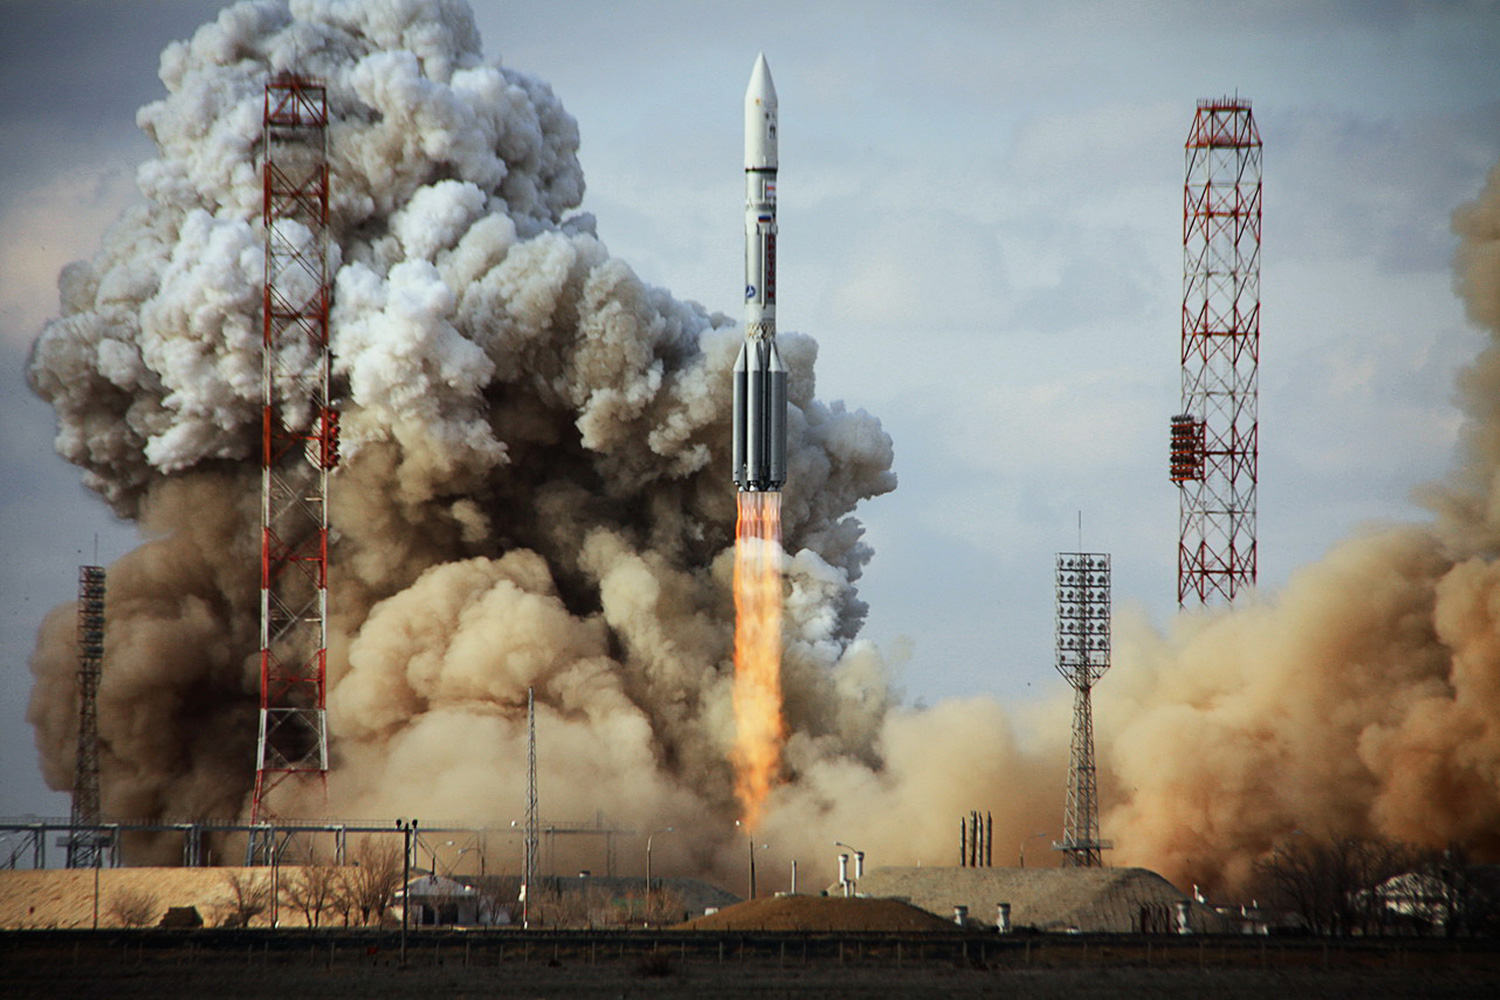 March 25, 2012. A Russian Proton rocket carrying a US Intelsat-22 satellite blasts off from Kazakhstan's Russian-leased Baikonur cosmo-drome.